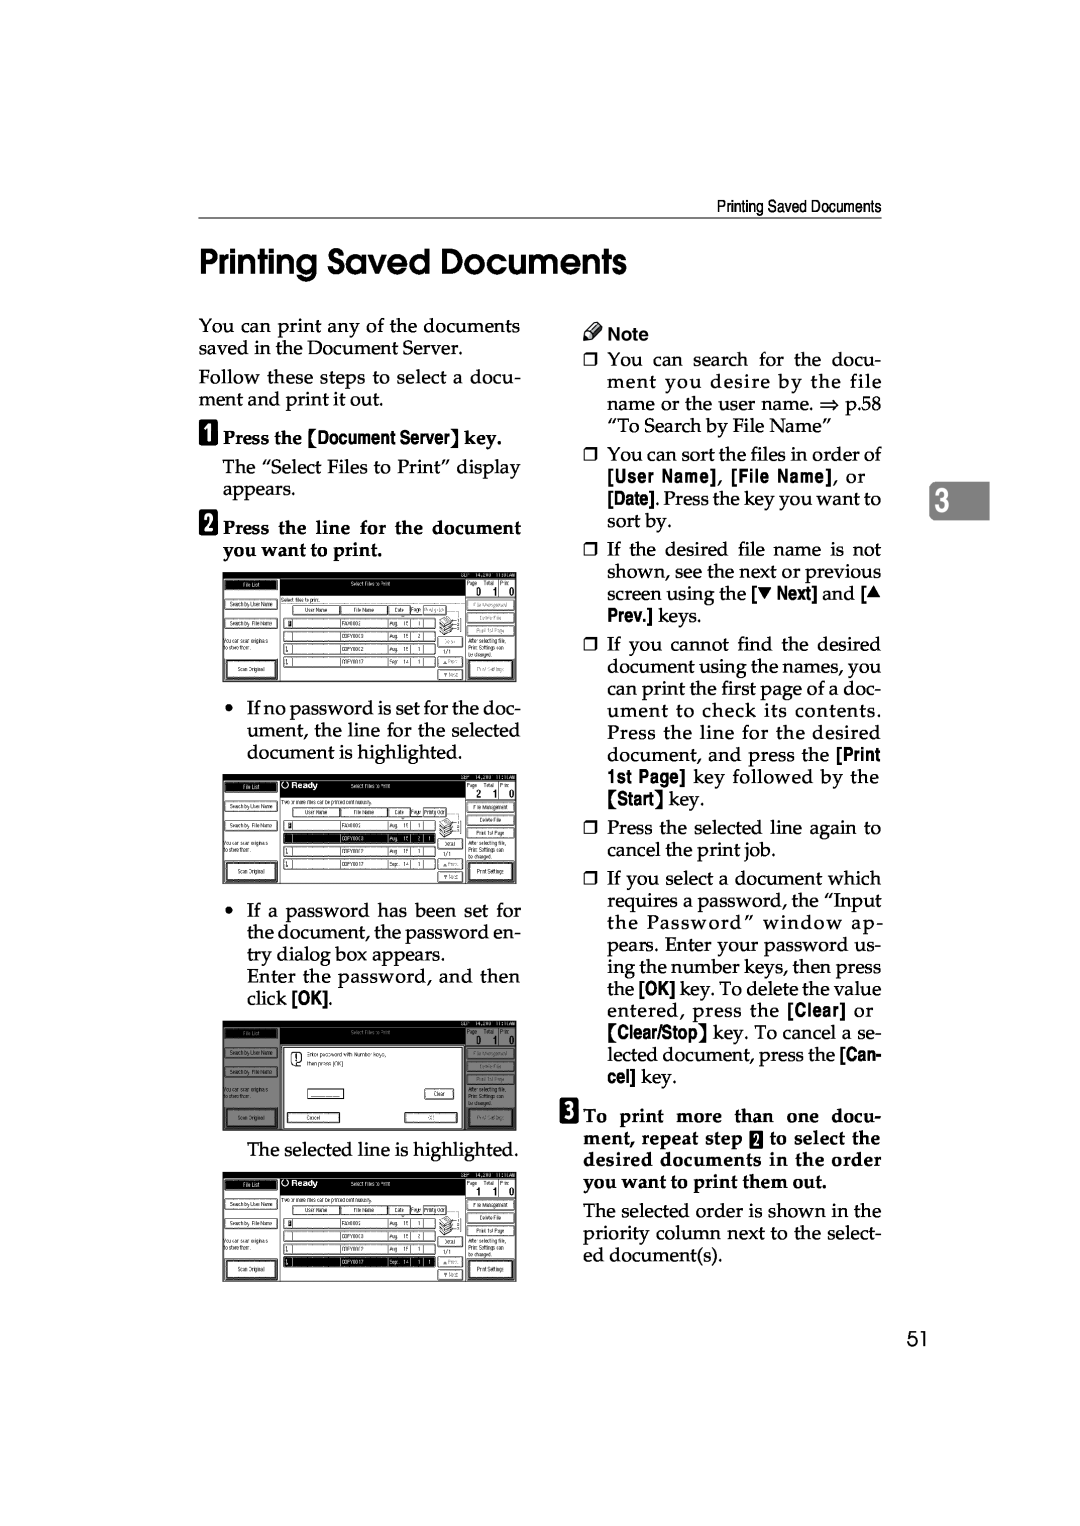 Lanier 5622 AG Printing Saved Documents, B Press the line for the document you want to print, User Name, File Name, or 